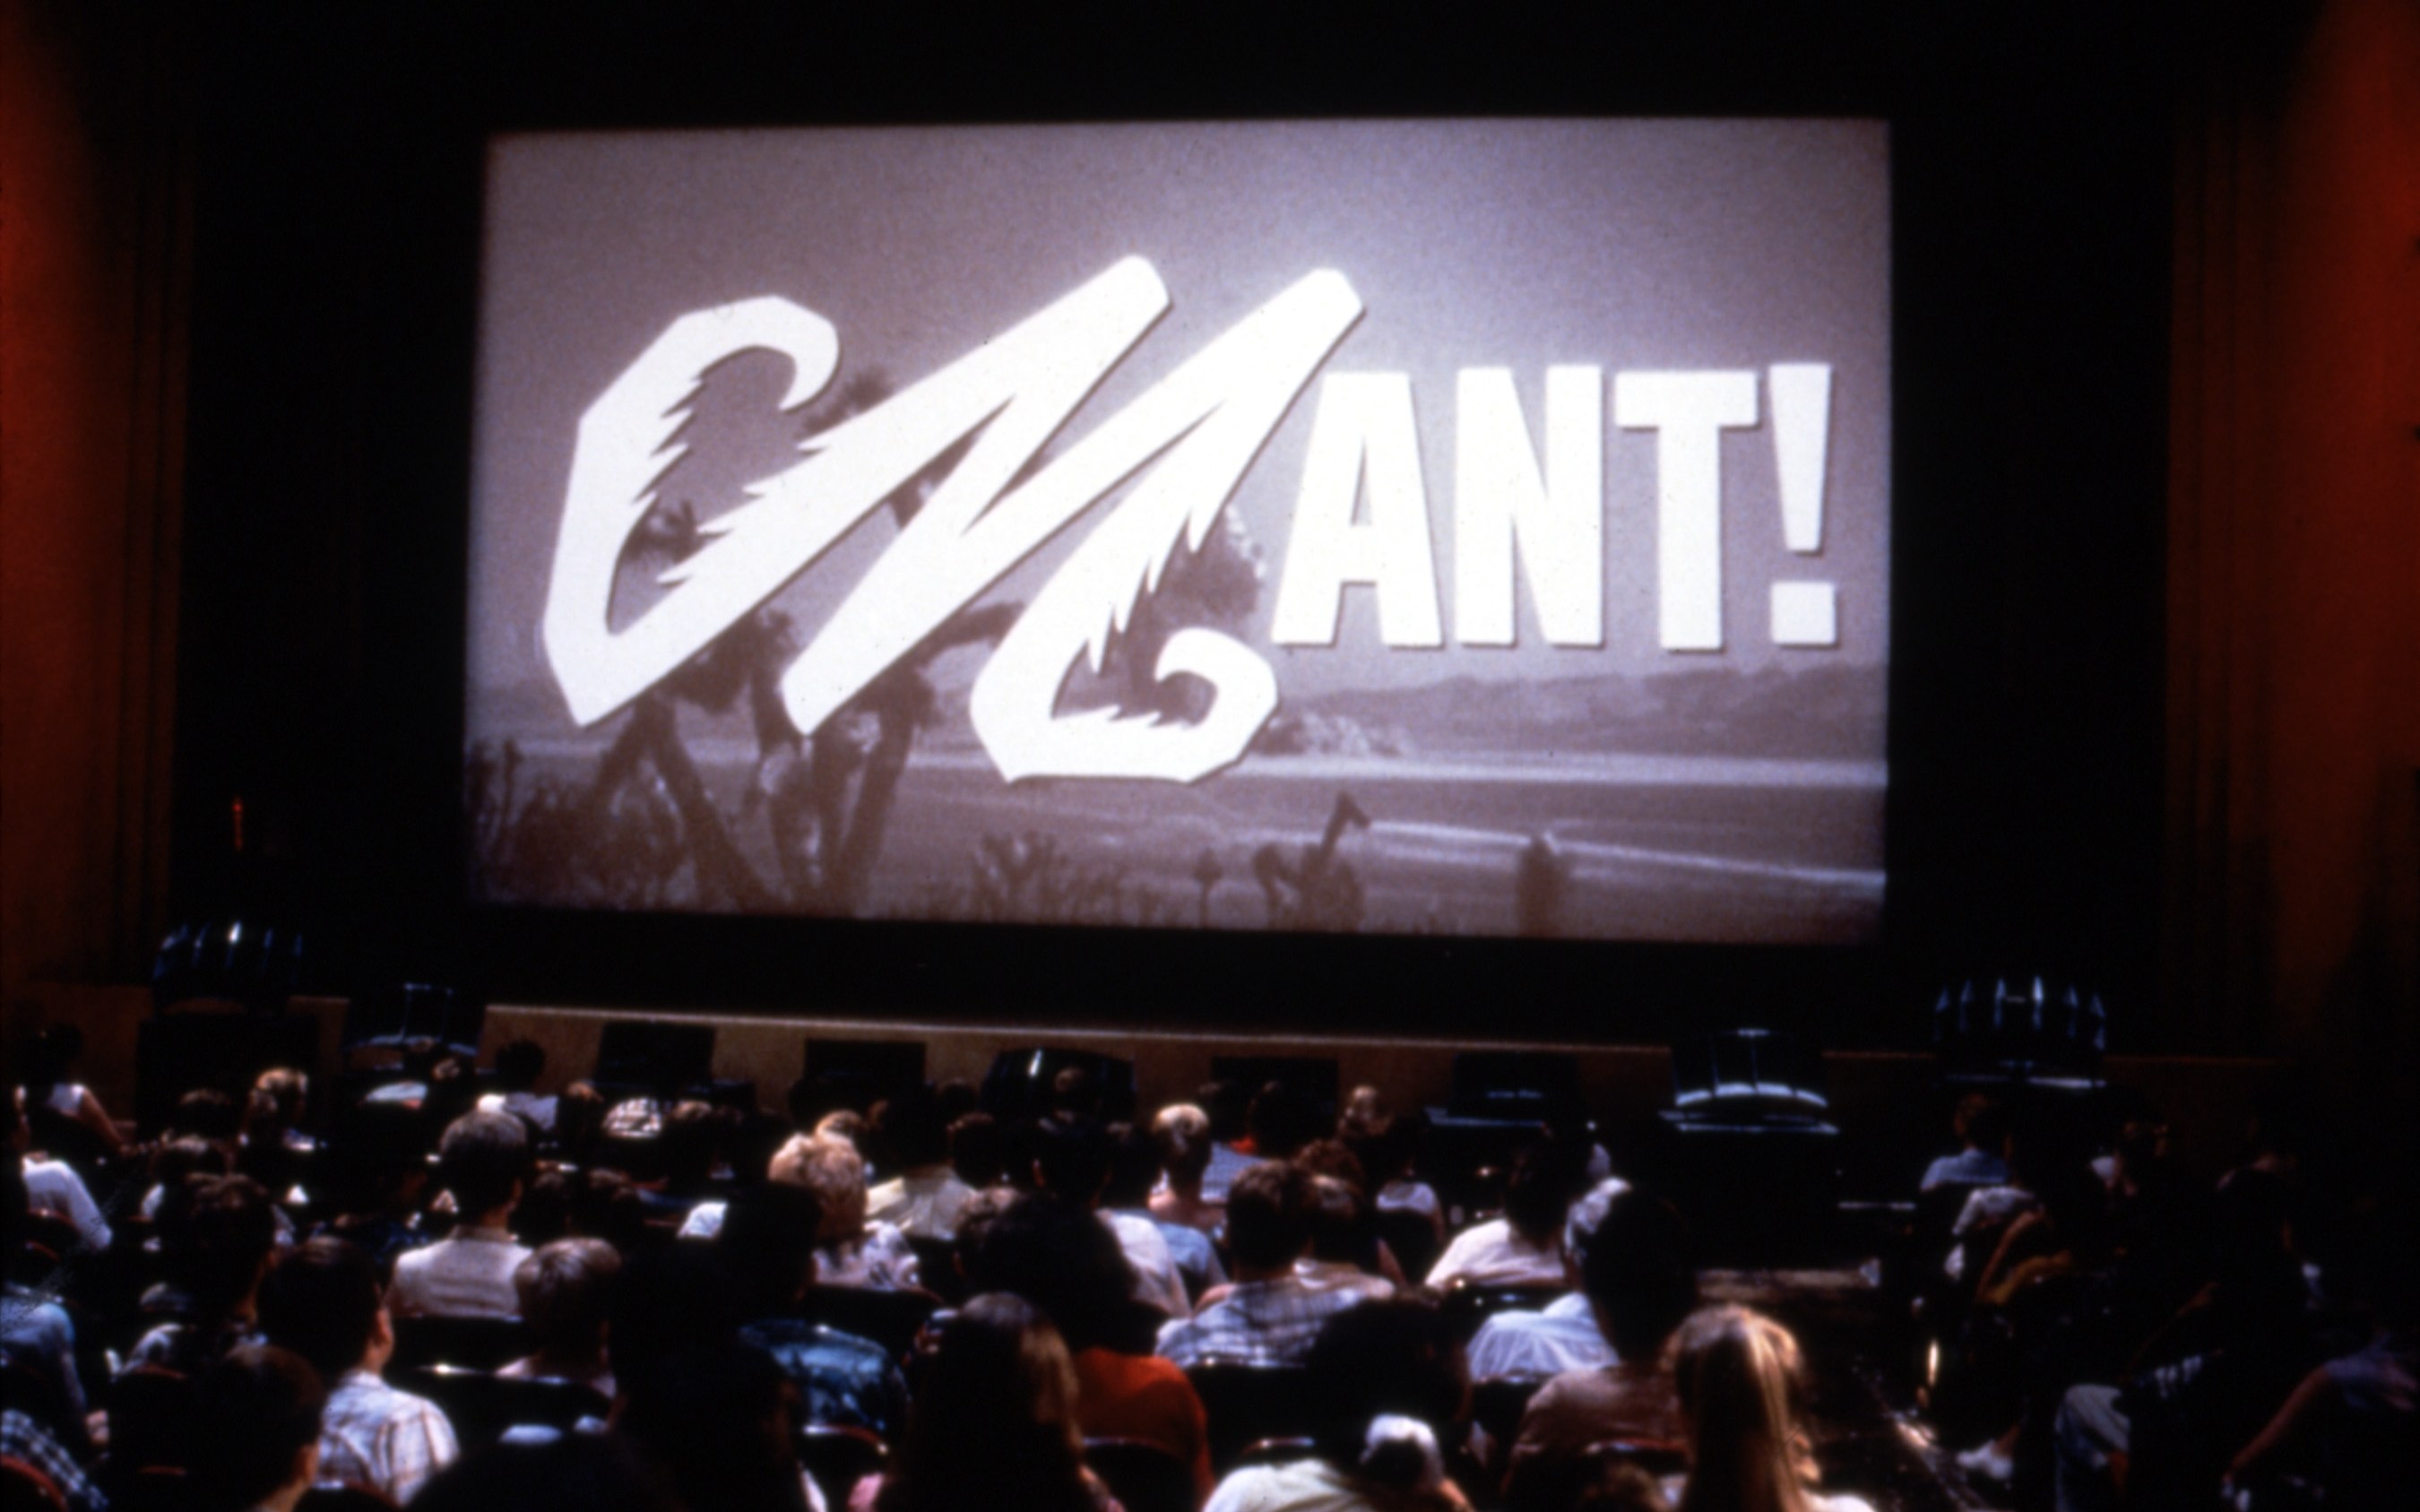 MATINEE, movie screen, 1993, (c)Universal Pictures/courtesy Everett Collection